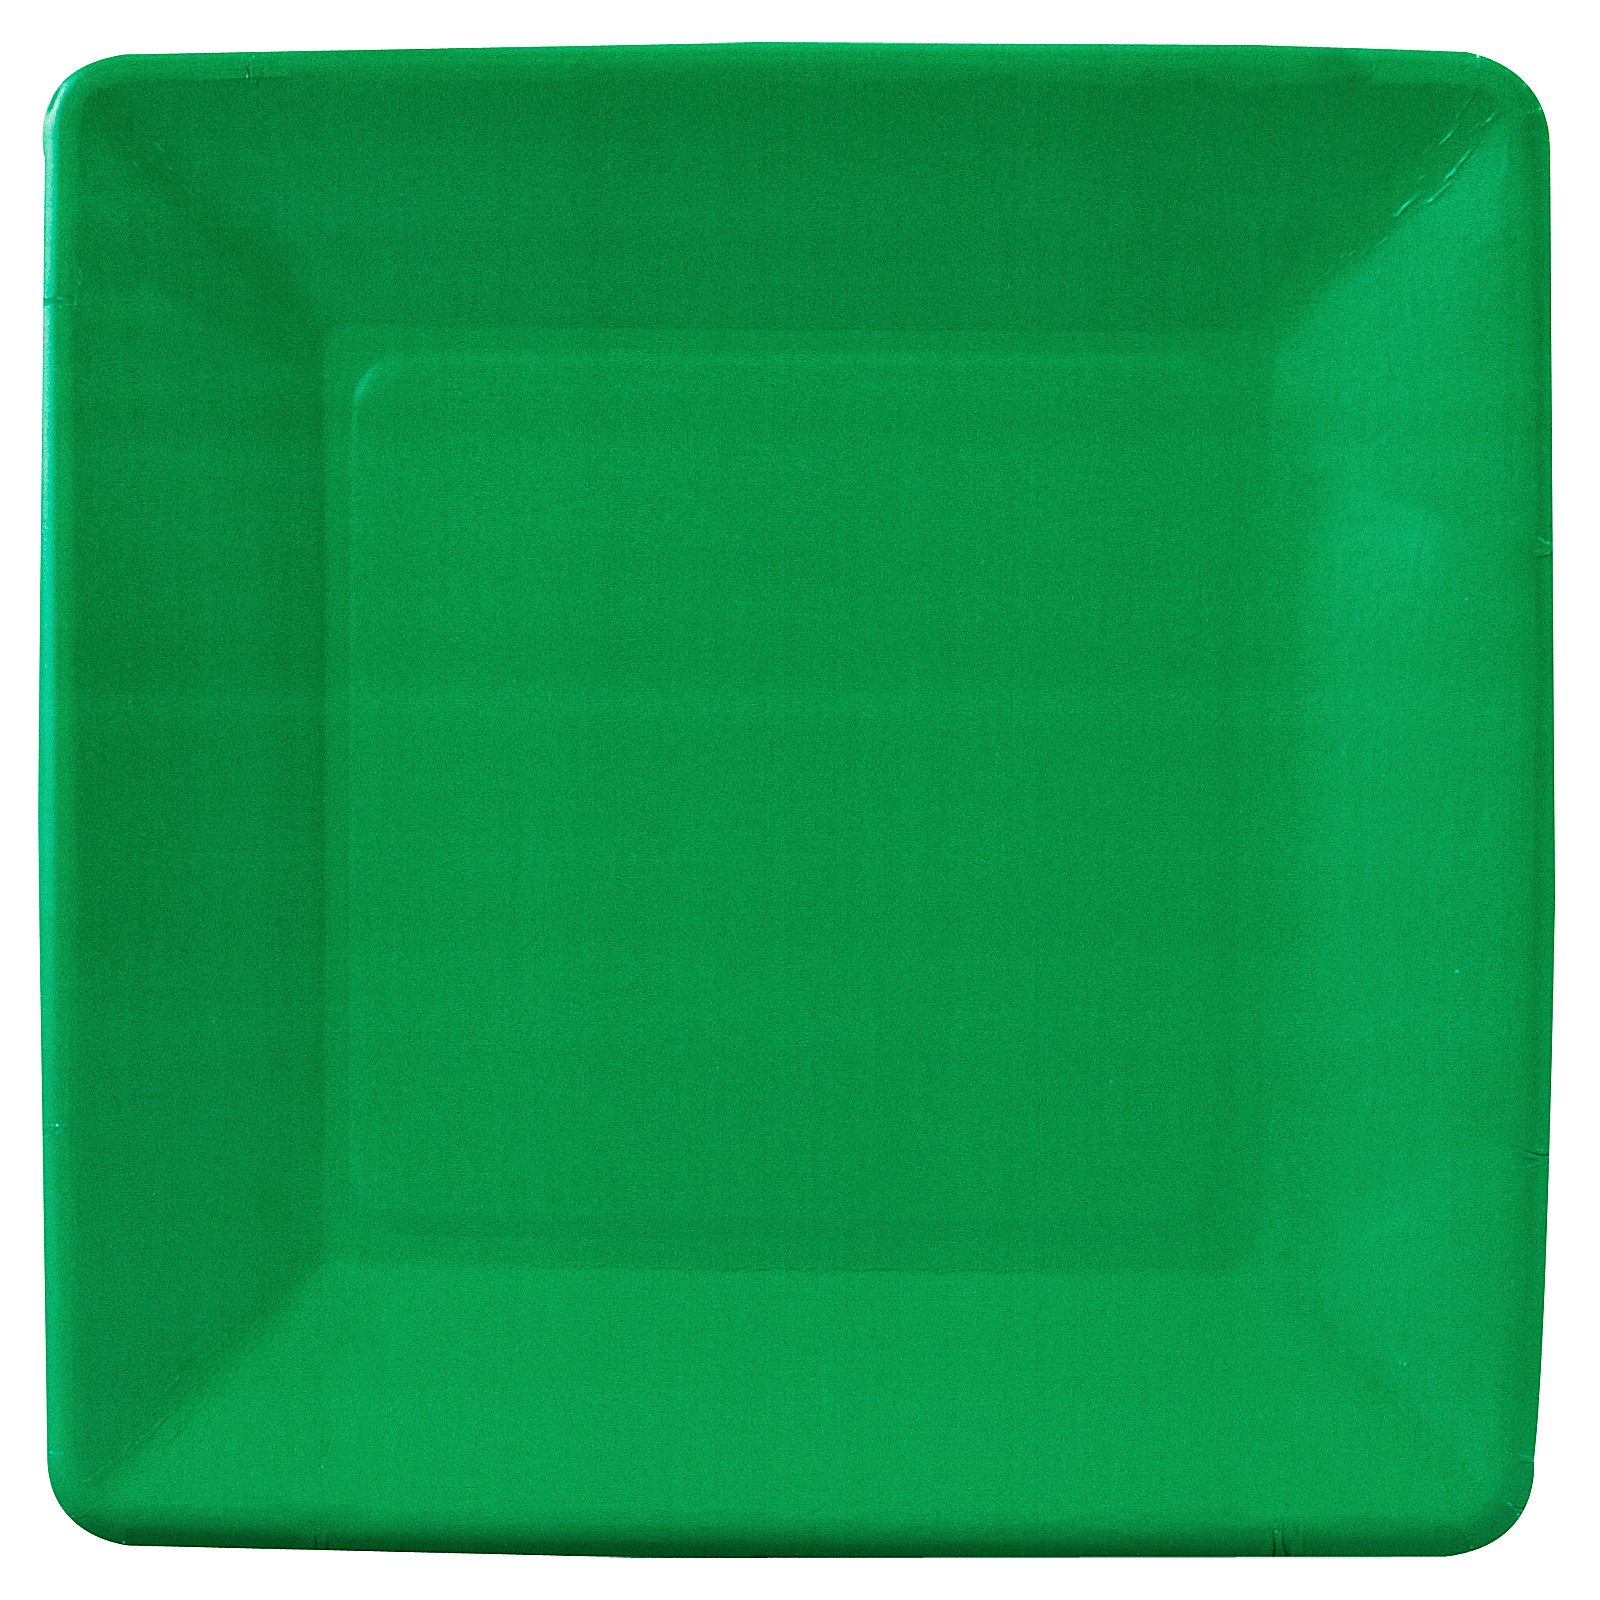 Emerald Green (Green) Square Dinner Plates (18 count)